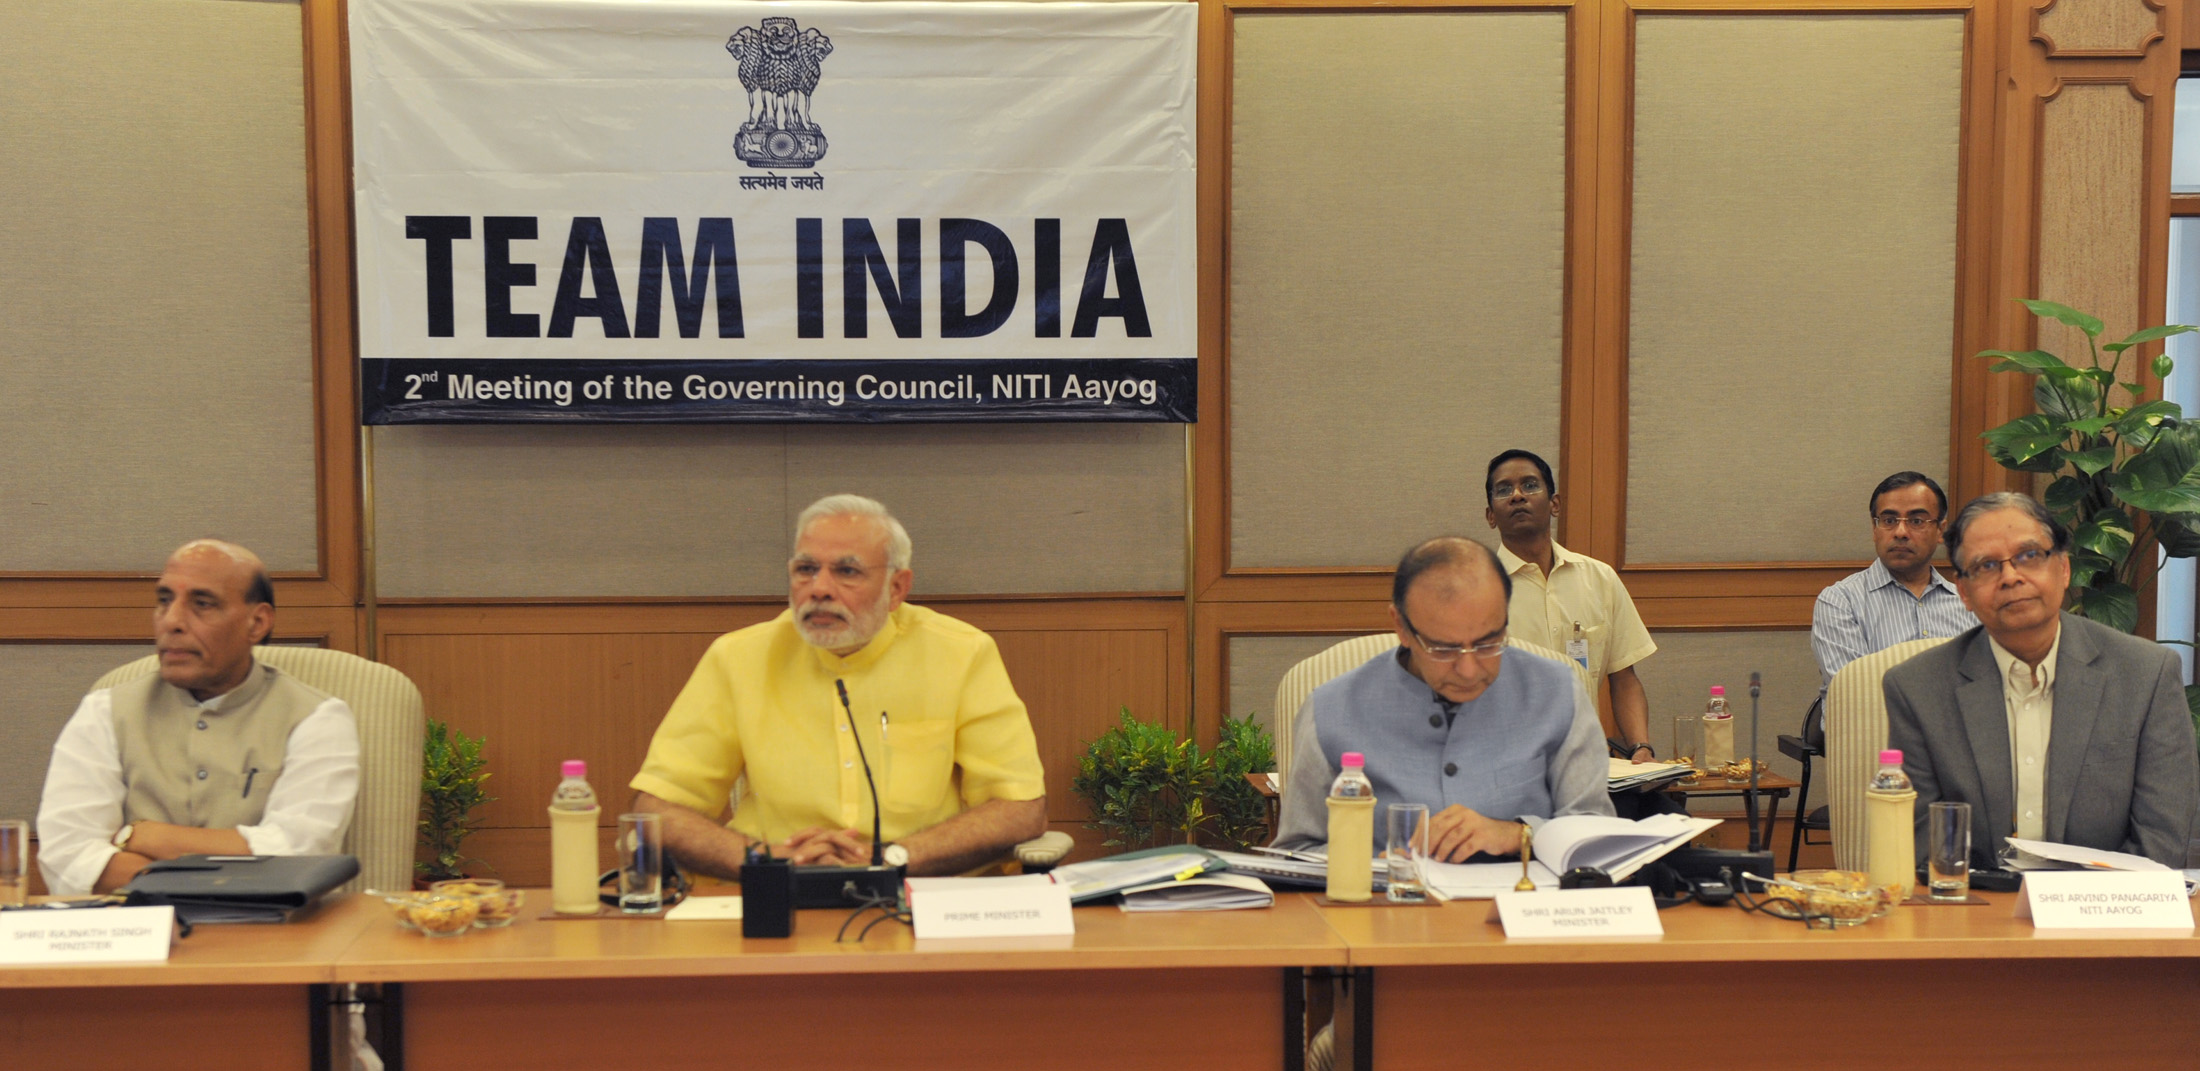 The Prime Minister, Shri Narendra Modi chairing the 2nd meeting of the Governing Council of NITI Aayog, in New Delhi on July 15, 2015.